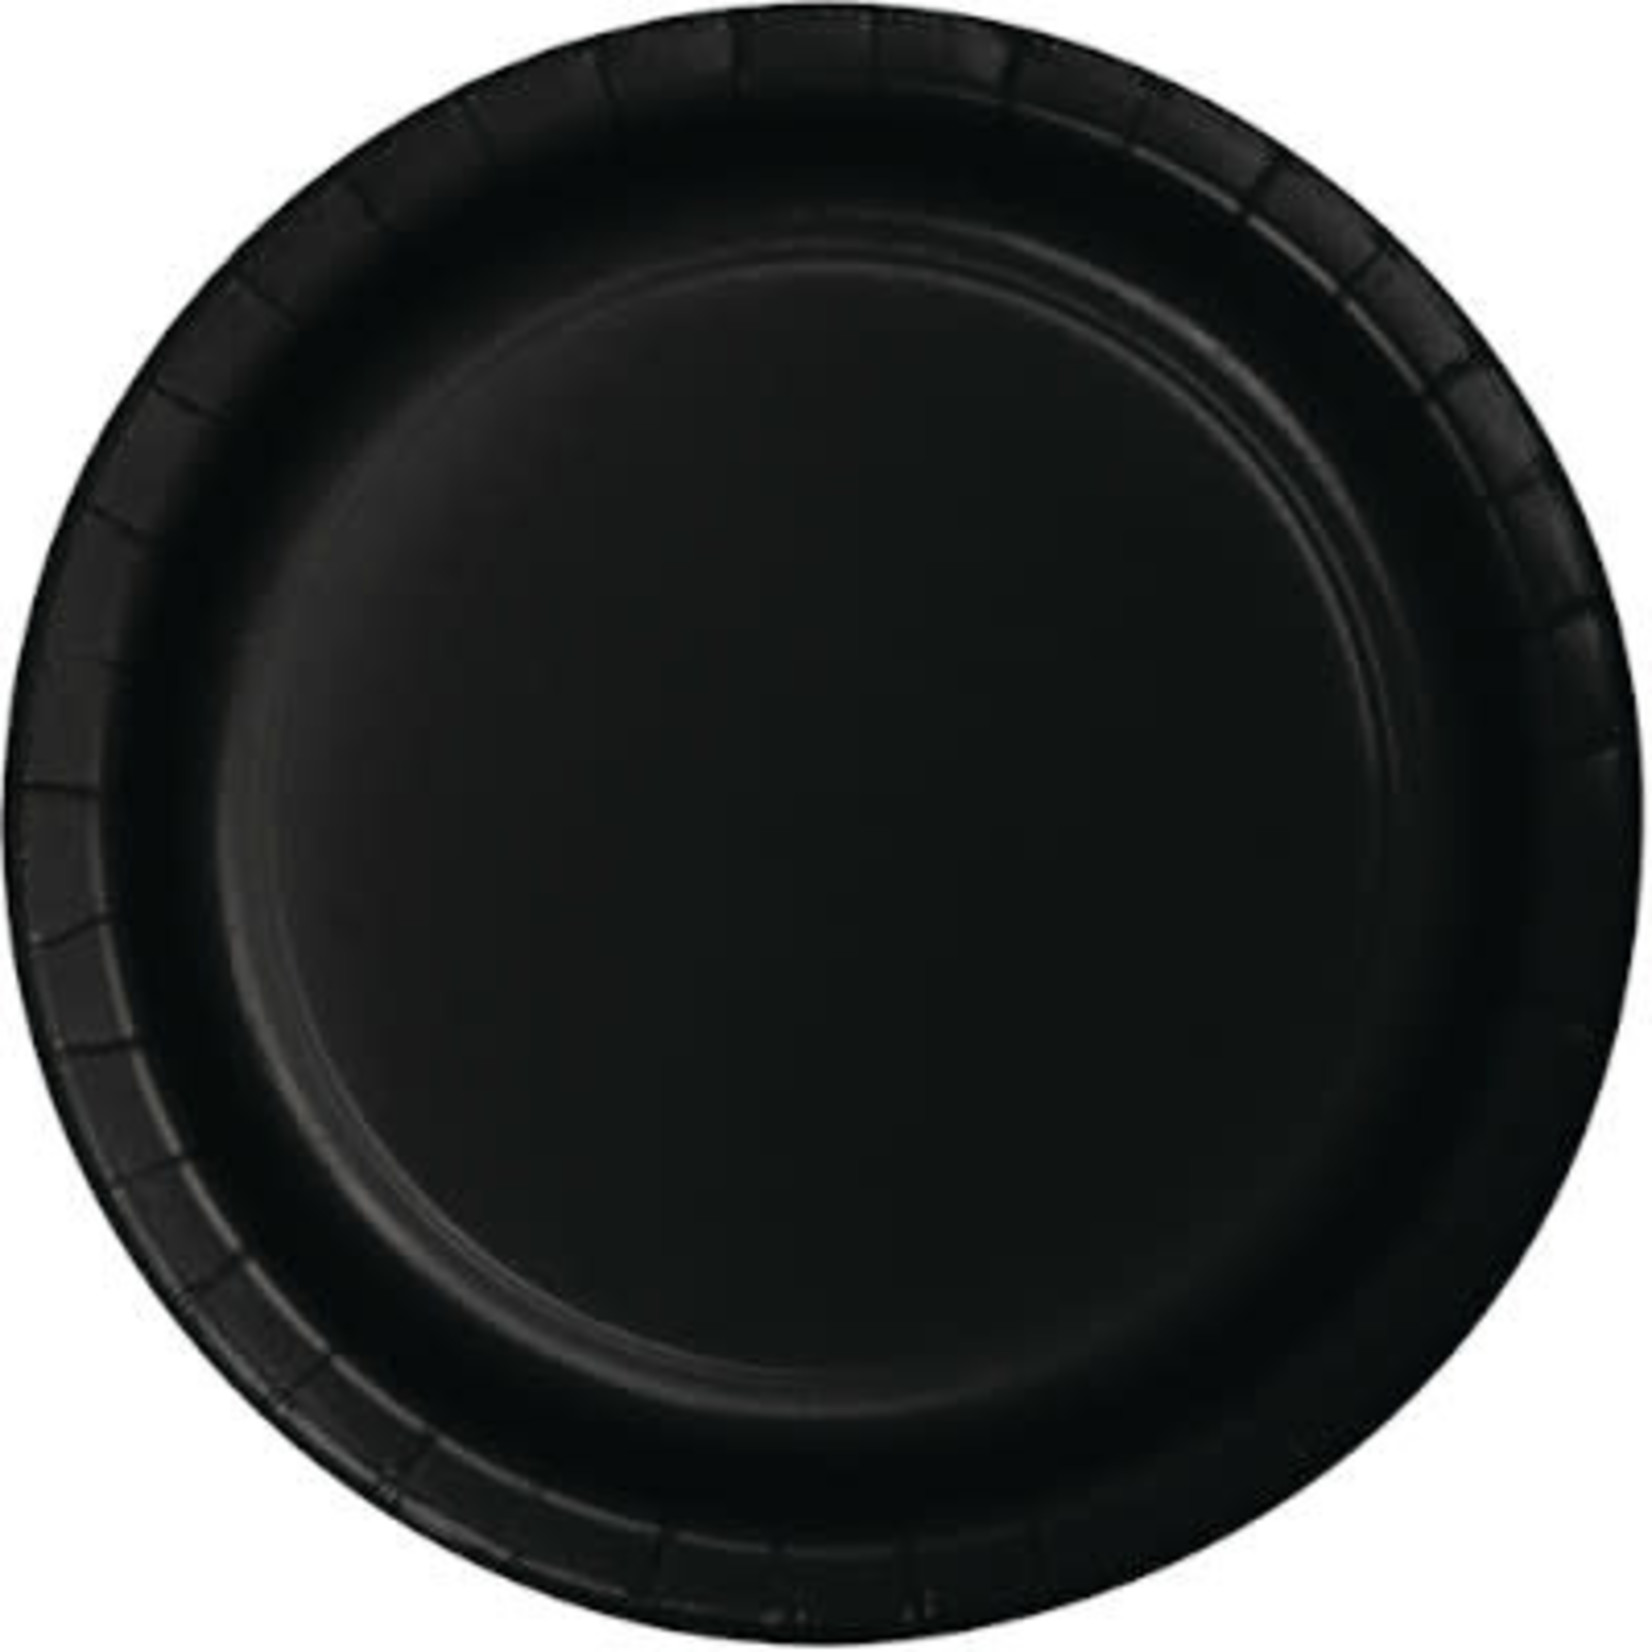 Touch of Color 7" Black Paper Plates - 24ct.